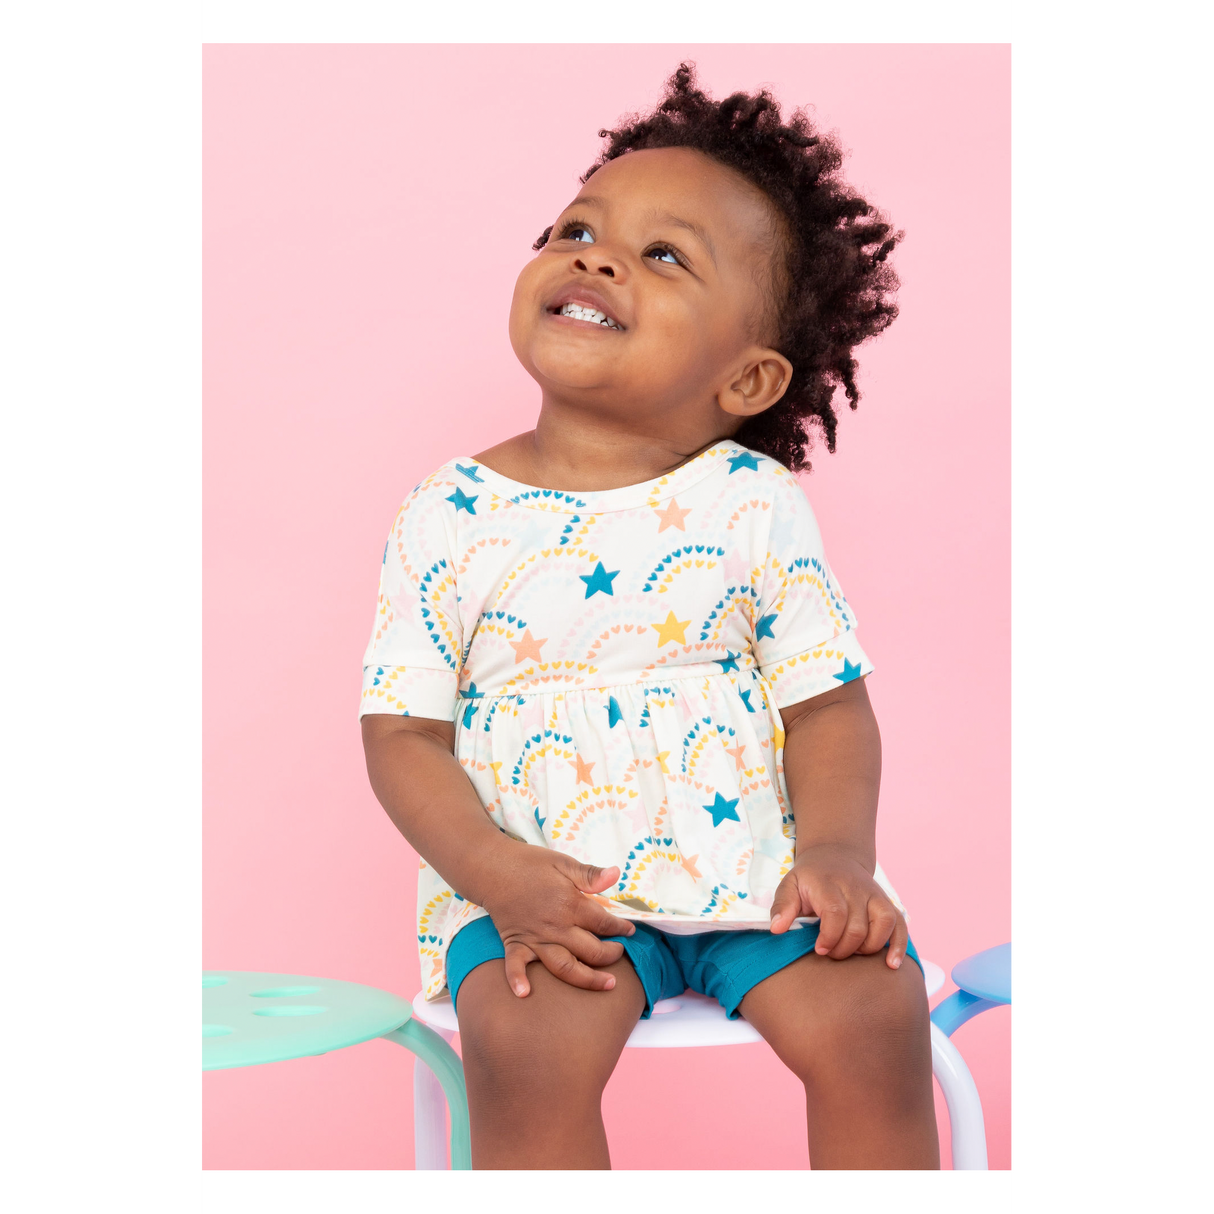 Tunic and Short Set - You're A Star - HoneyBug 